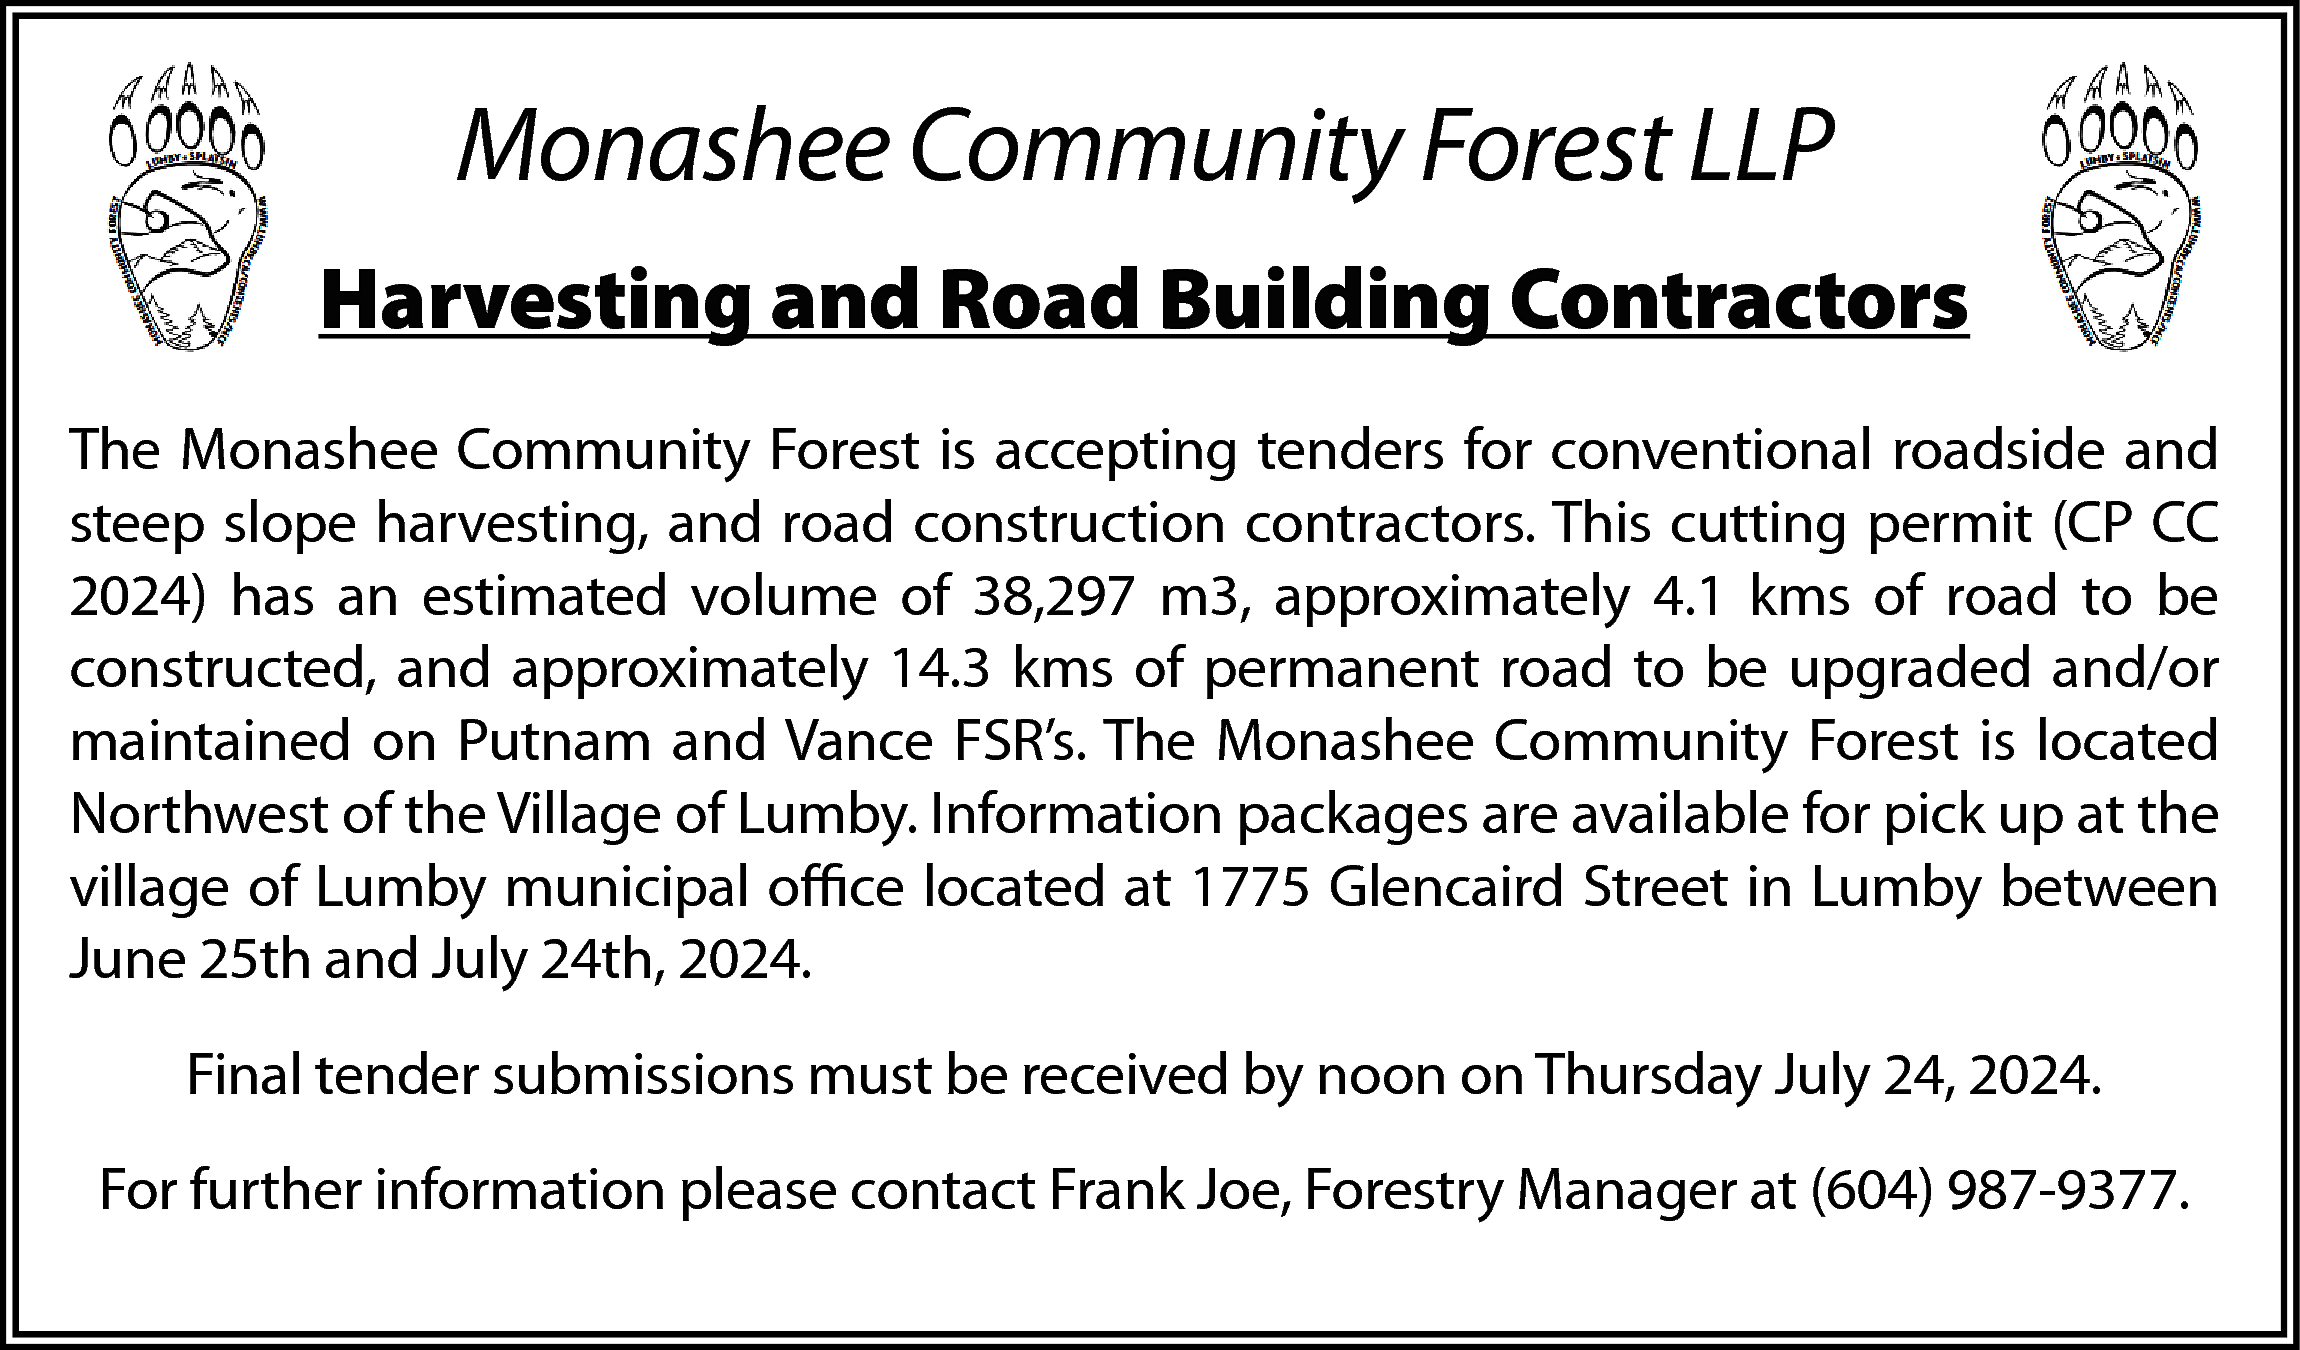 Monashee Community Forest LLP <br>Harvesting  Monashee Community Forest LLP  Harvesting and Road Building Contractors  The Monashee Community Forest is accepting tenders for conventional roadside and  steep slope harvesting, and road construction contractors. This cutting permit (CP CC  2024) has an estimated volume of 38,297 m3, approximately 4.1 kms of road to be  constructed, and approximately 14.3 kms of permanent road to be upgraded and/or  maintained on Putnam and Vance FSR’s. The Monashee Community Forest is located  Northwest of the Village of Lumby. Information packages are available for pick up at the  village of Lumby municipal office located at 1775 Glencaird Street in Lumby between  June 25th and July 24th, 2024.  Final tender submissions must be received by noon on Thursday July 24, 2024.  For further information please contact Frank Joe, Forestry Manager at (604) 987-9377.    